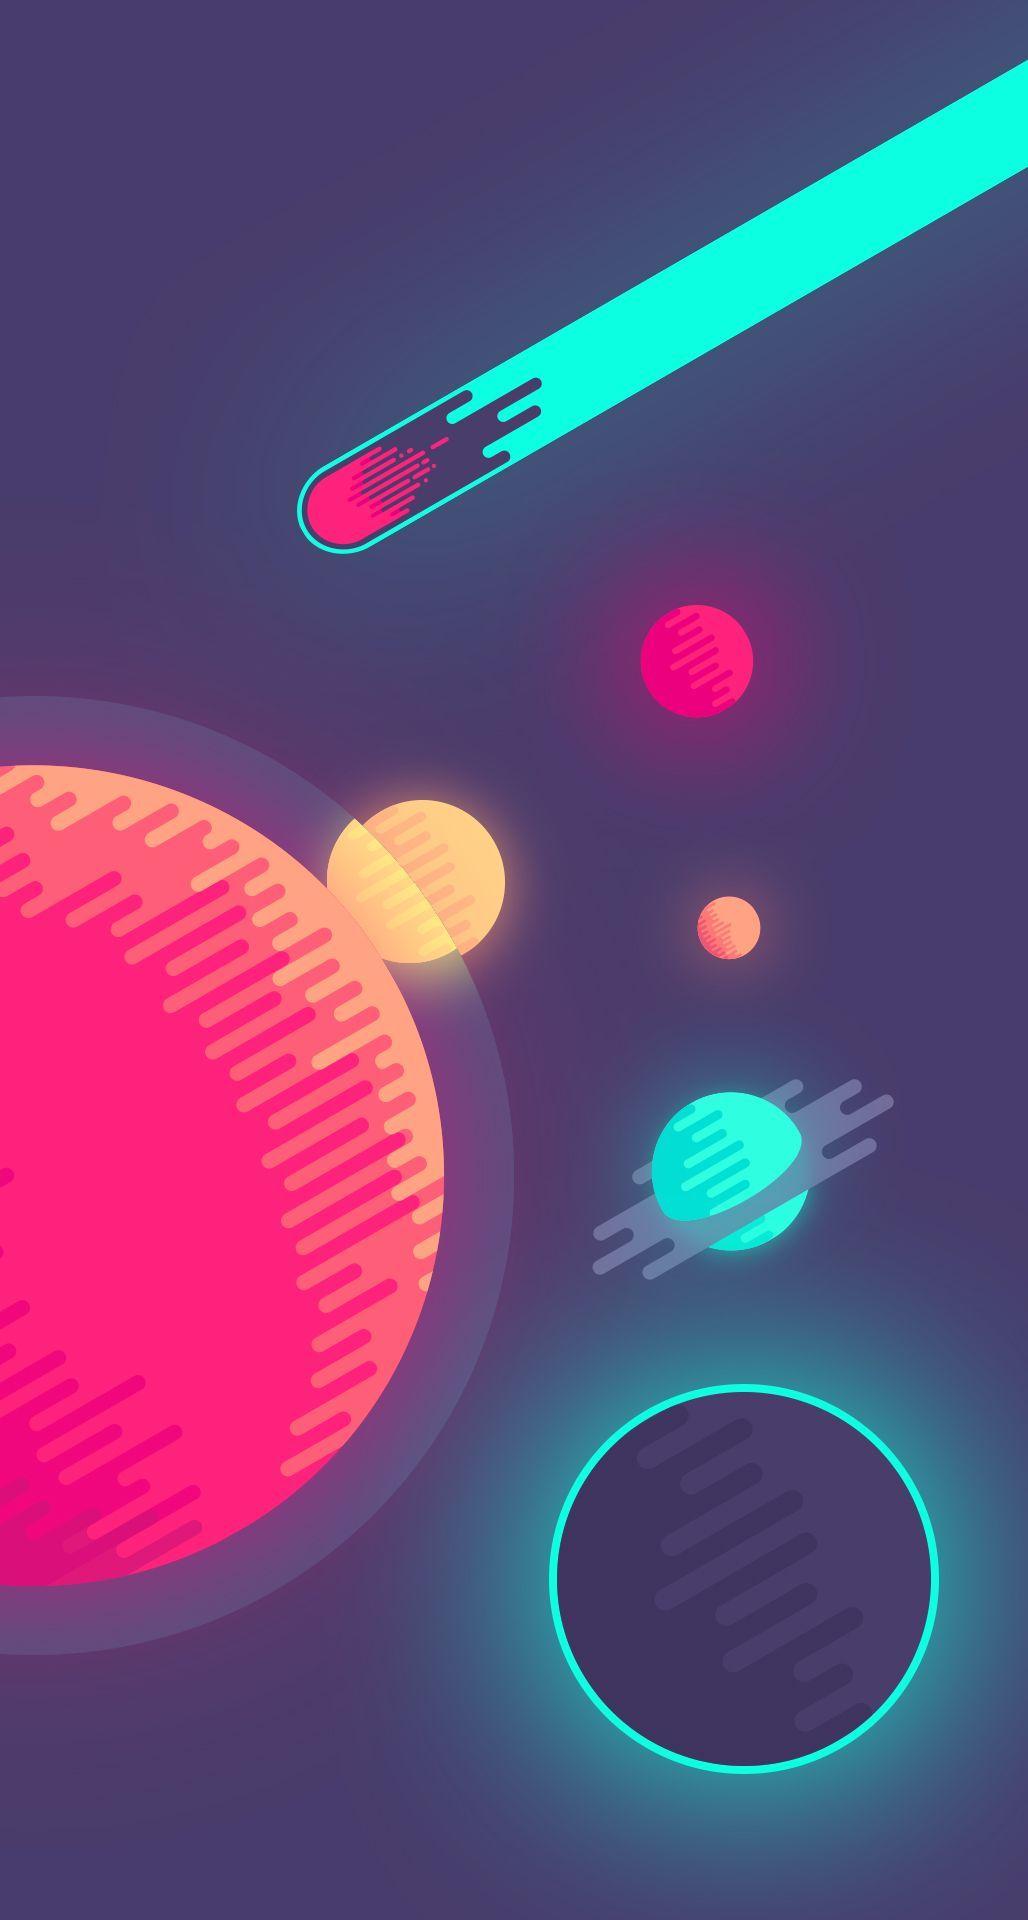 Sharing my space wallpaper. Hipster wallpaper, iPhone wallpaper hipster, Hipster phone wallpaper